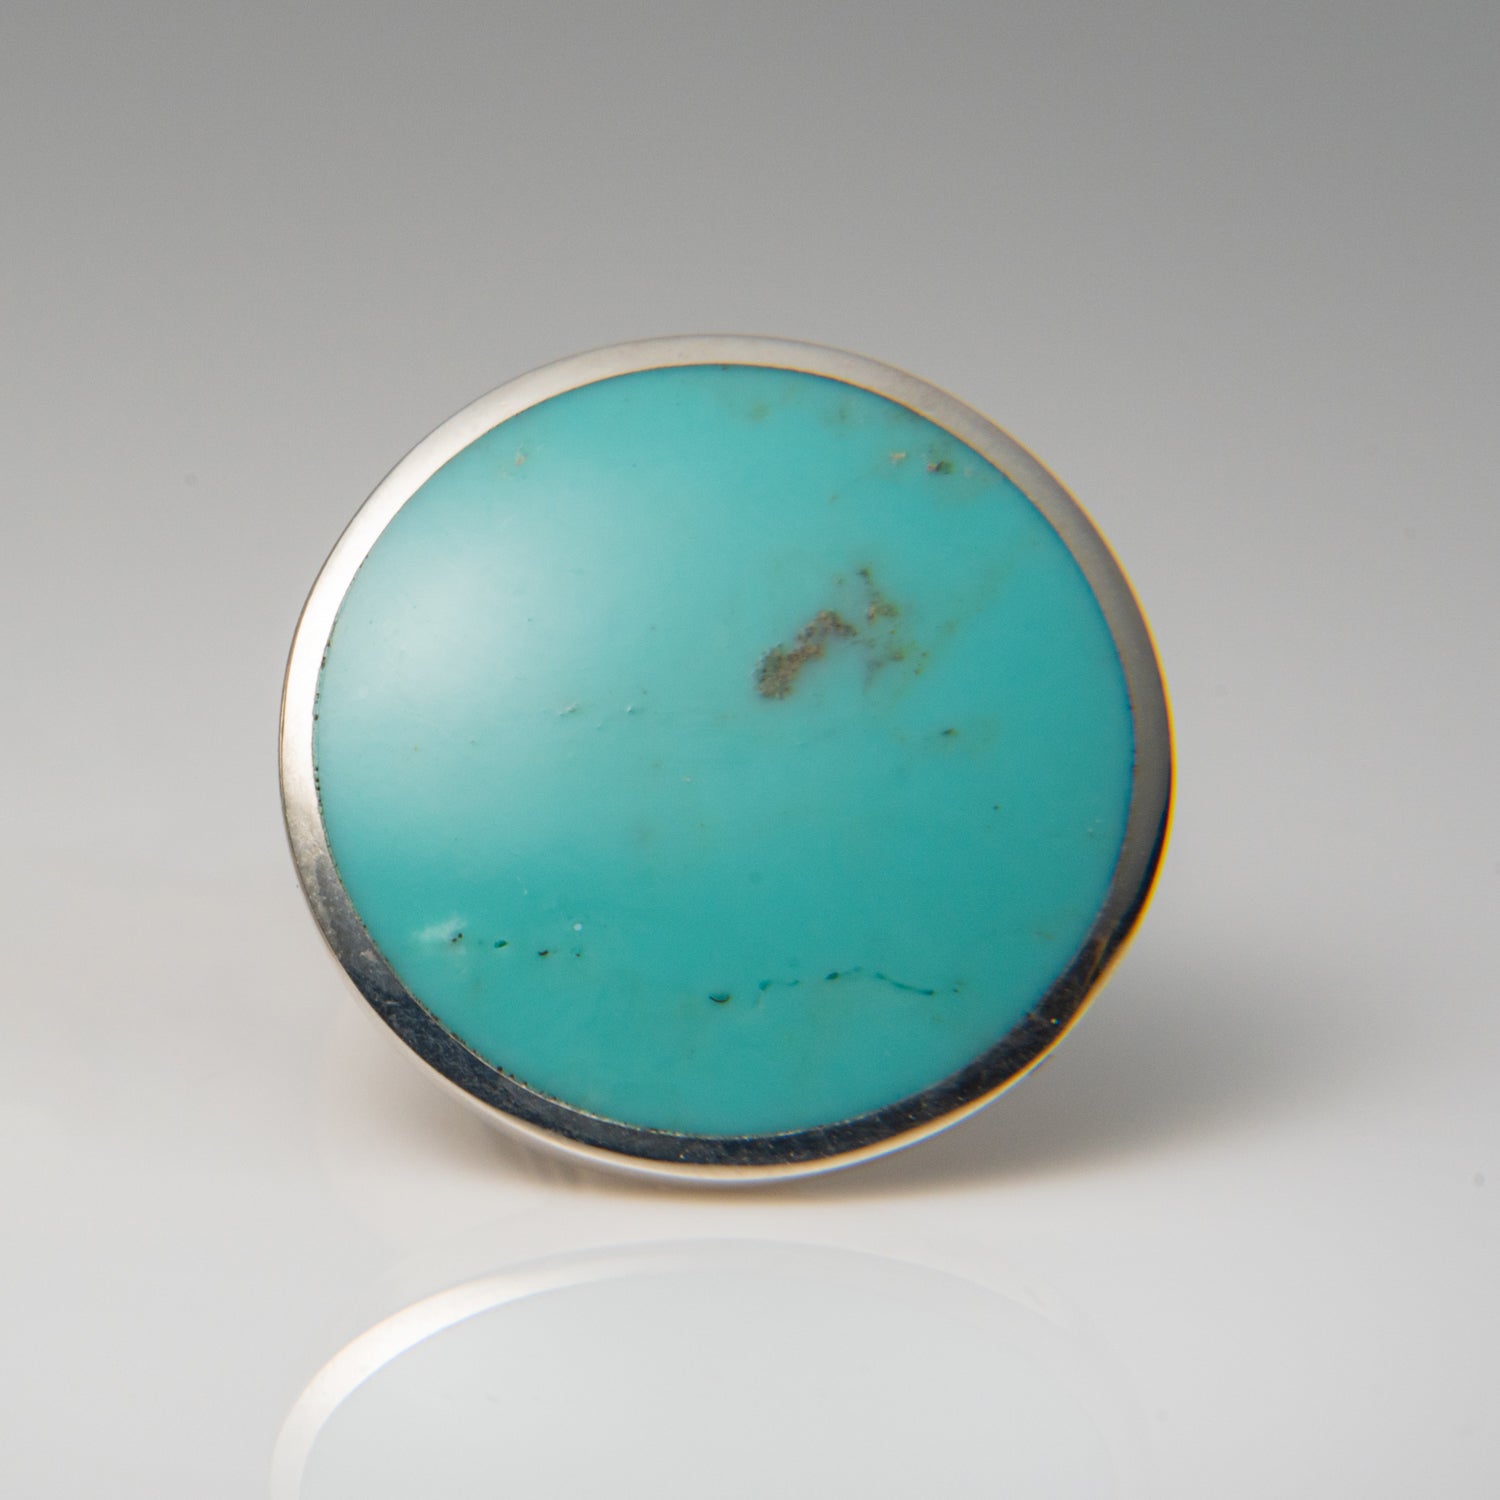 Genuine Turquoise Sterling Silver Cufflinks